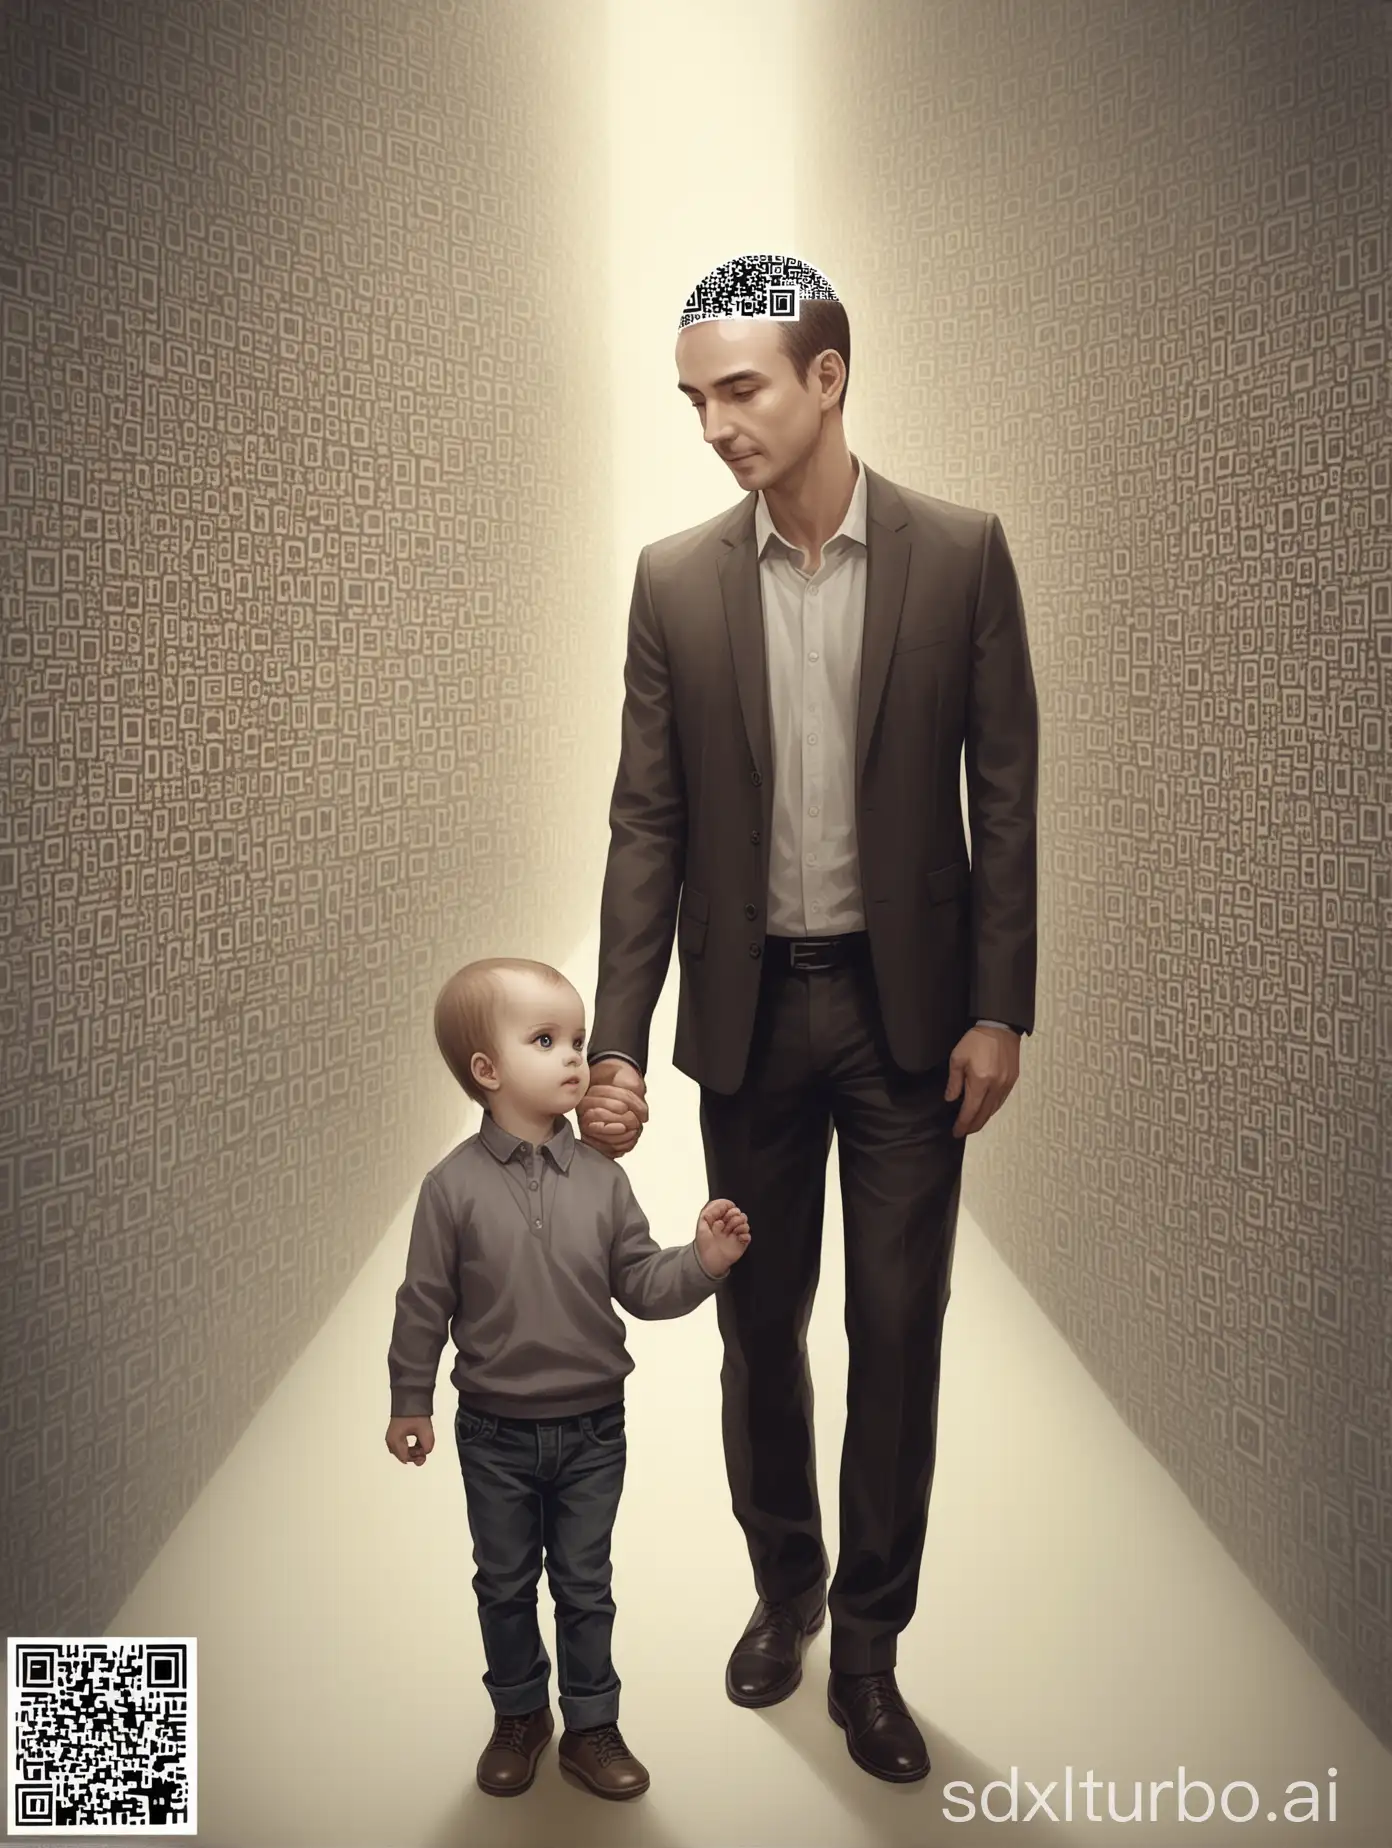 Generate an artistic image of a man holding a child’s hand, with a QR code on his forehead. The scene should depict a family, with the QR code standing out clearly on the man's head."
